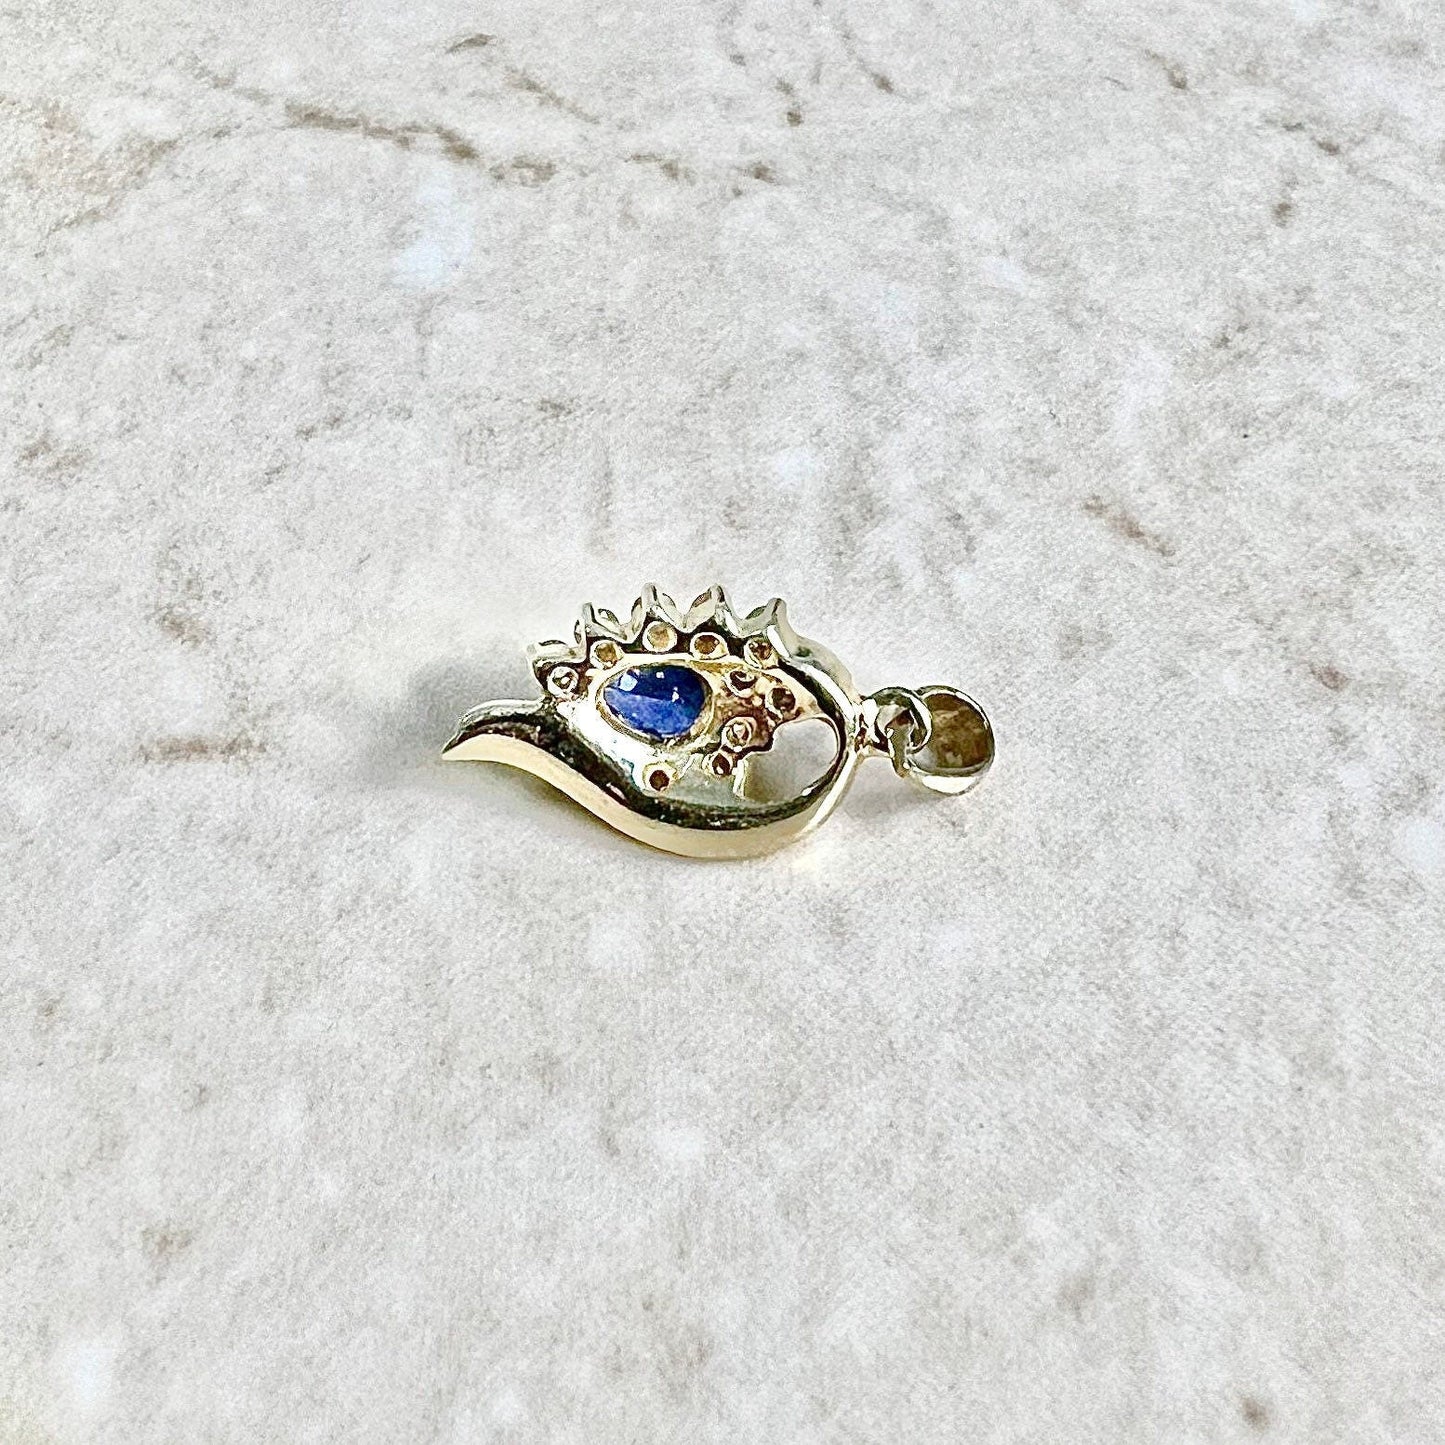 14K Diamond Sapphire Pendant Necklace - Yellow Gold Sapphire Necklace - September Birthstone - Birthday Gift For Her - Best Gifts For Women